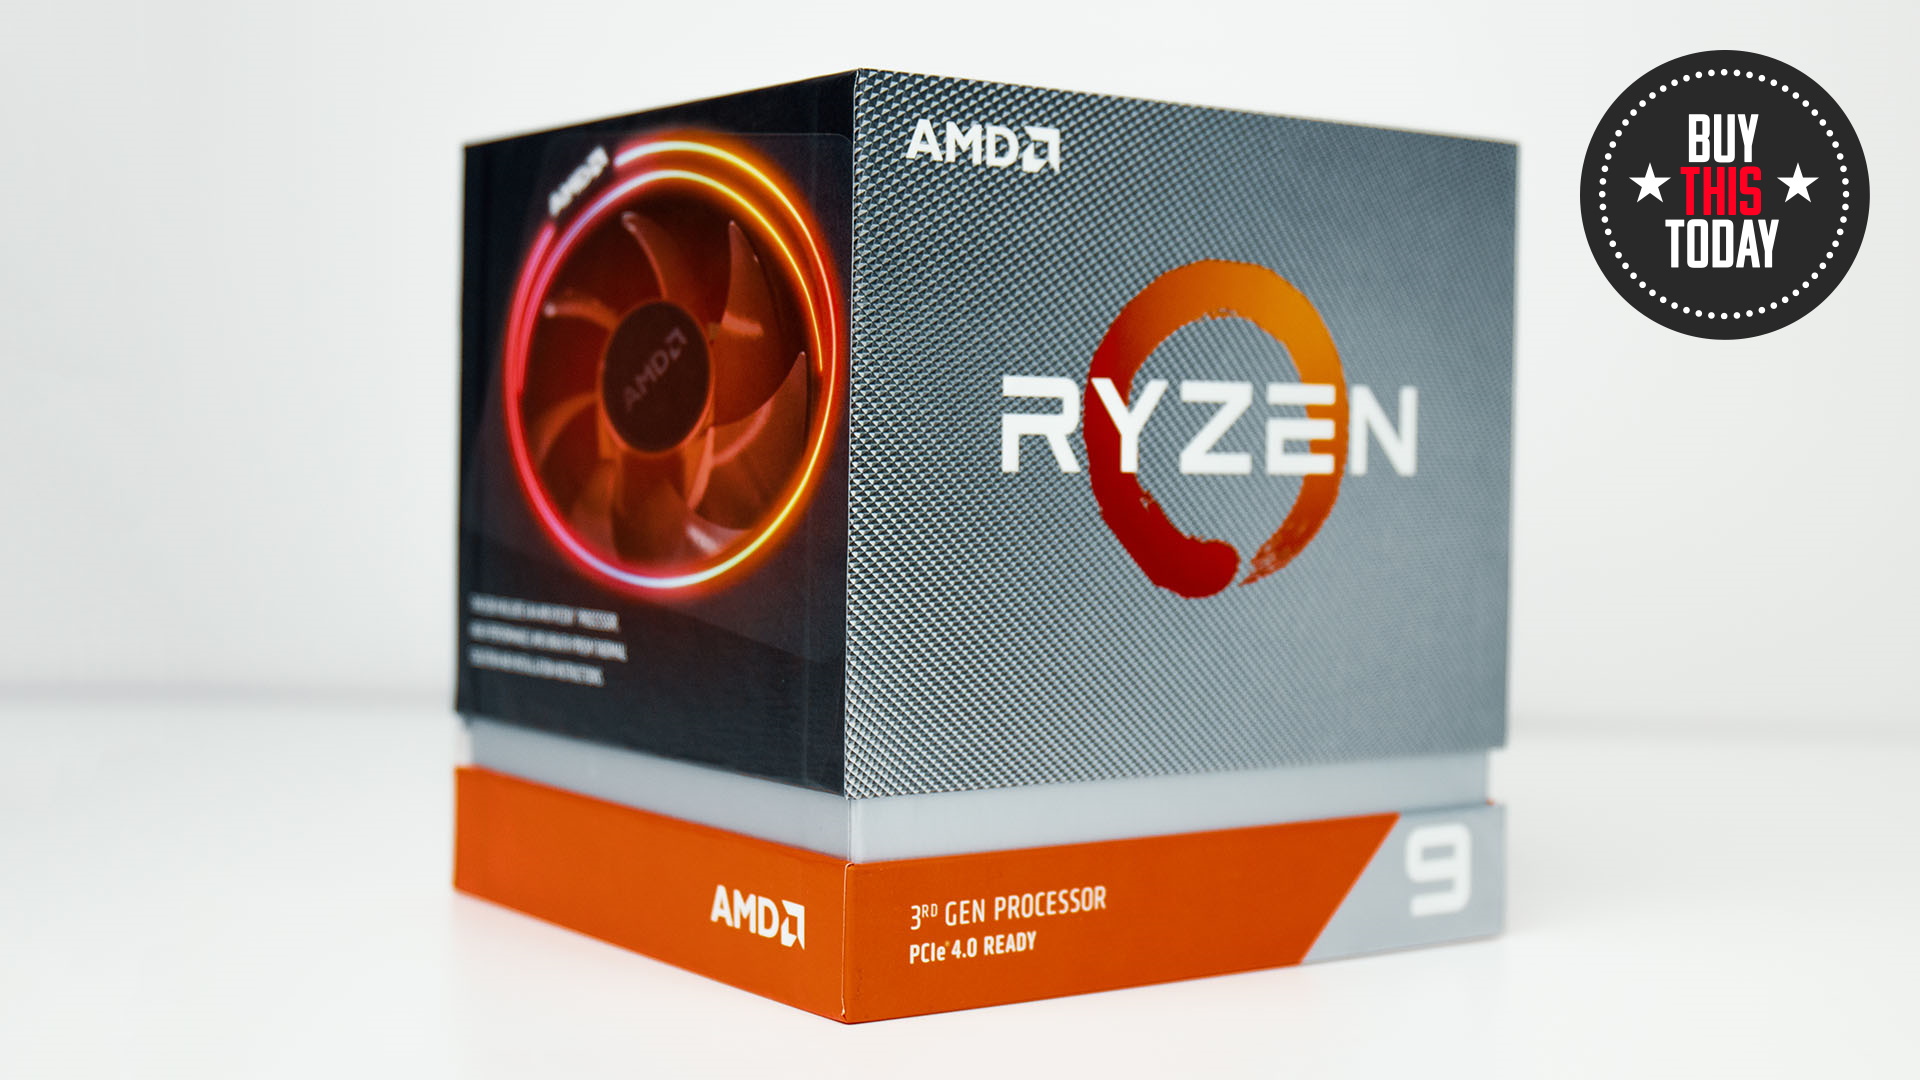 Buy this today: AMD Ryzen 9 3900X, the best high-end CPU | PCGamesN